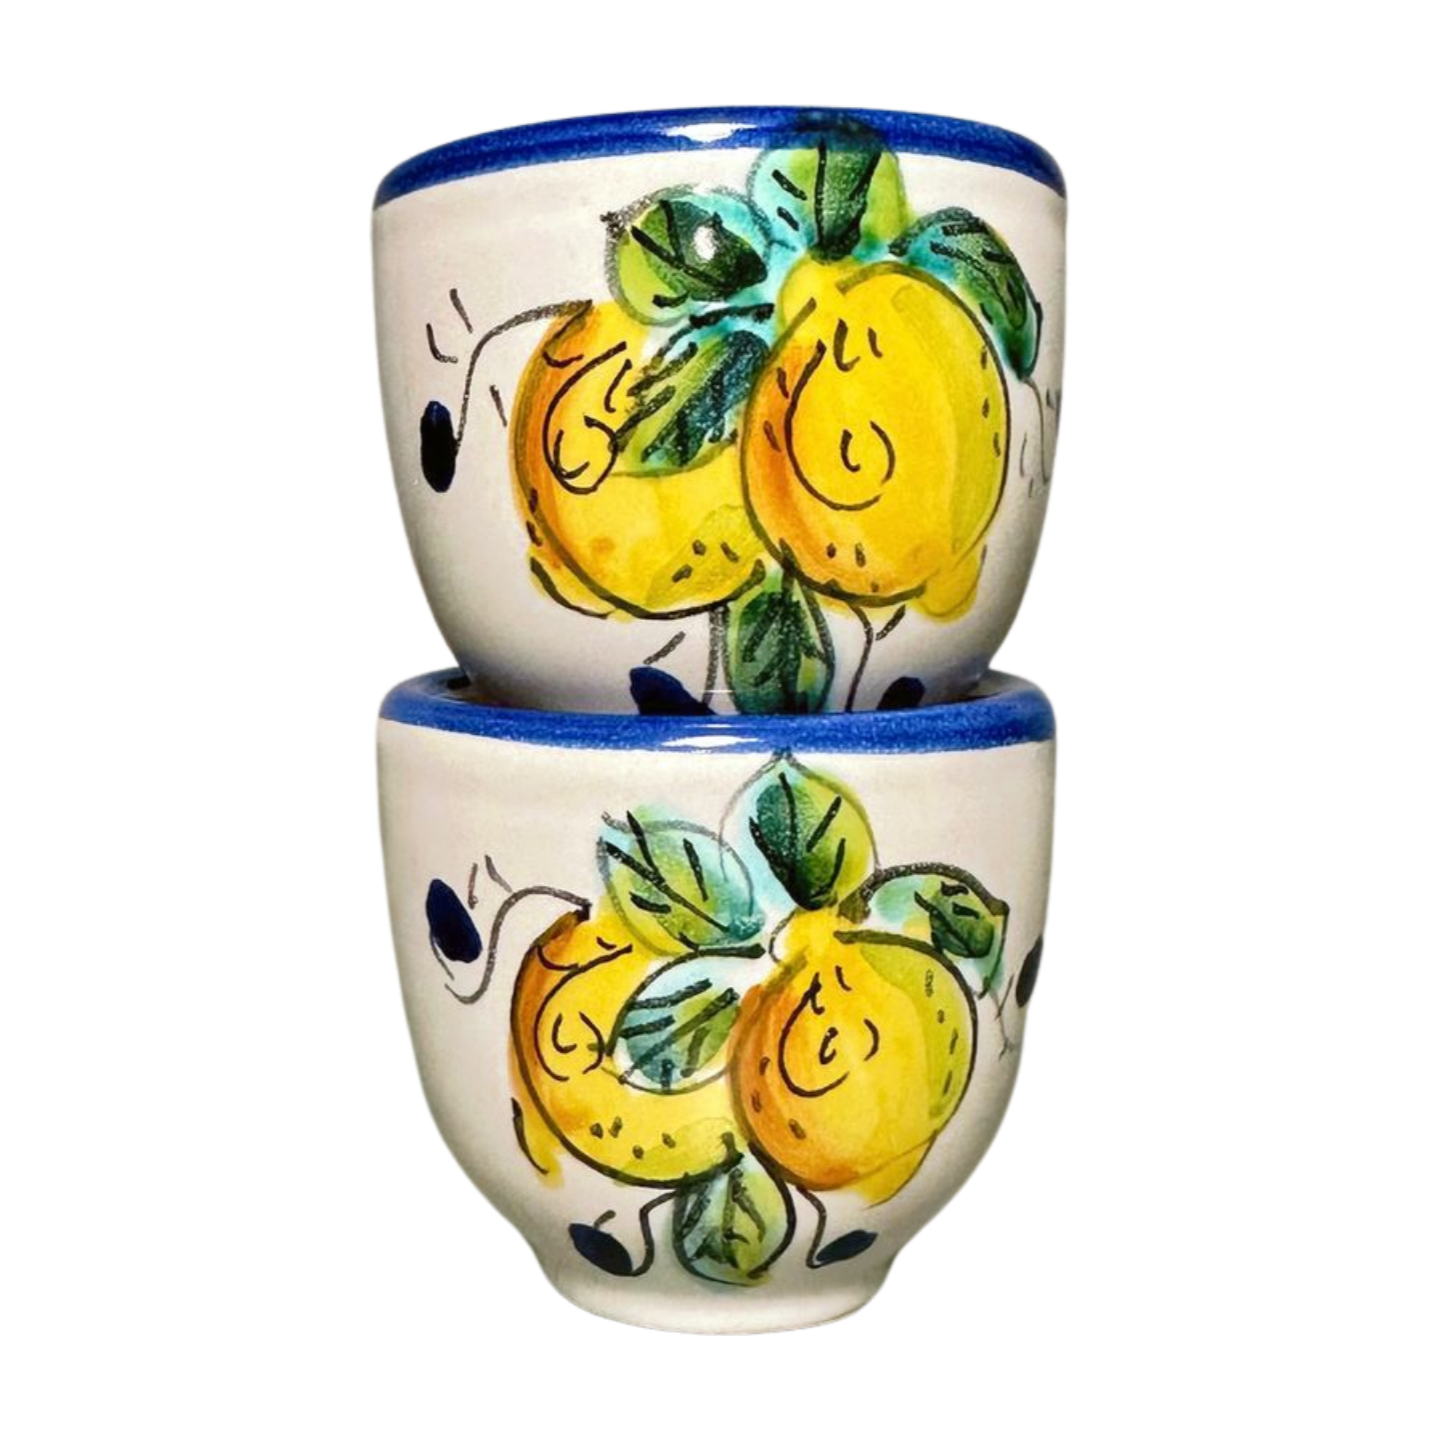 Italian espresso cups featuring a yellow lemon design with a blue rim and handle. Stacked on top of one another.